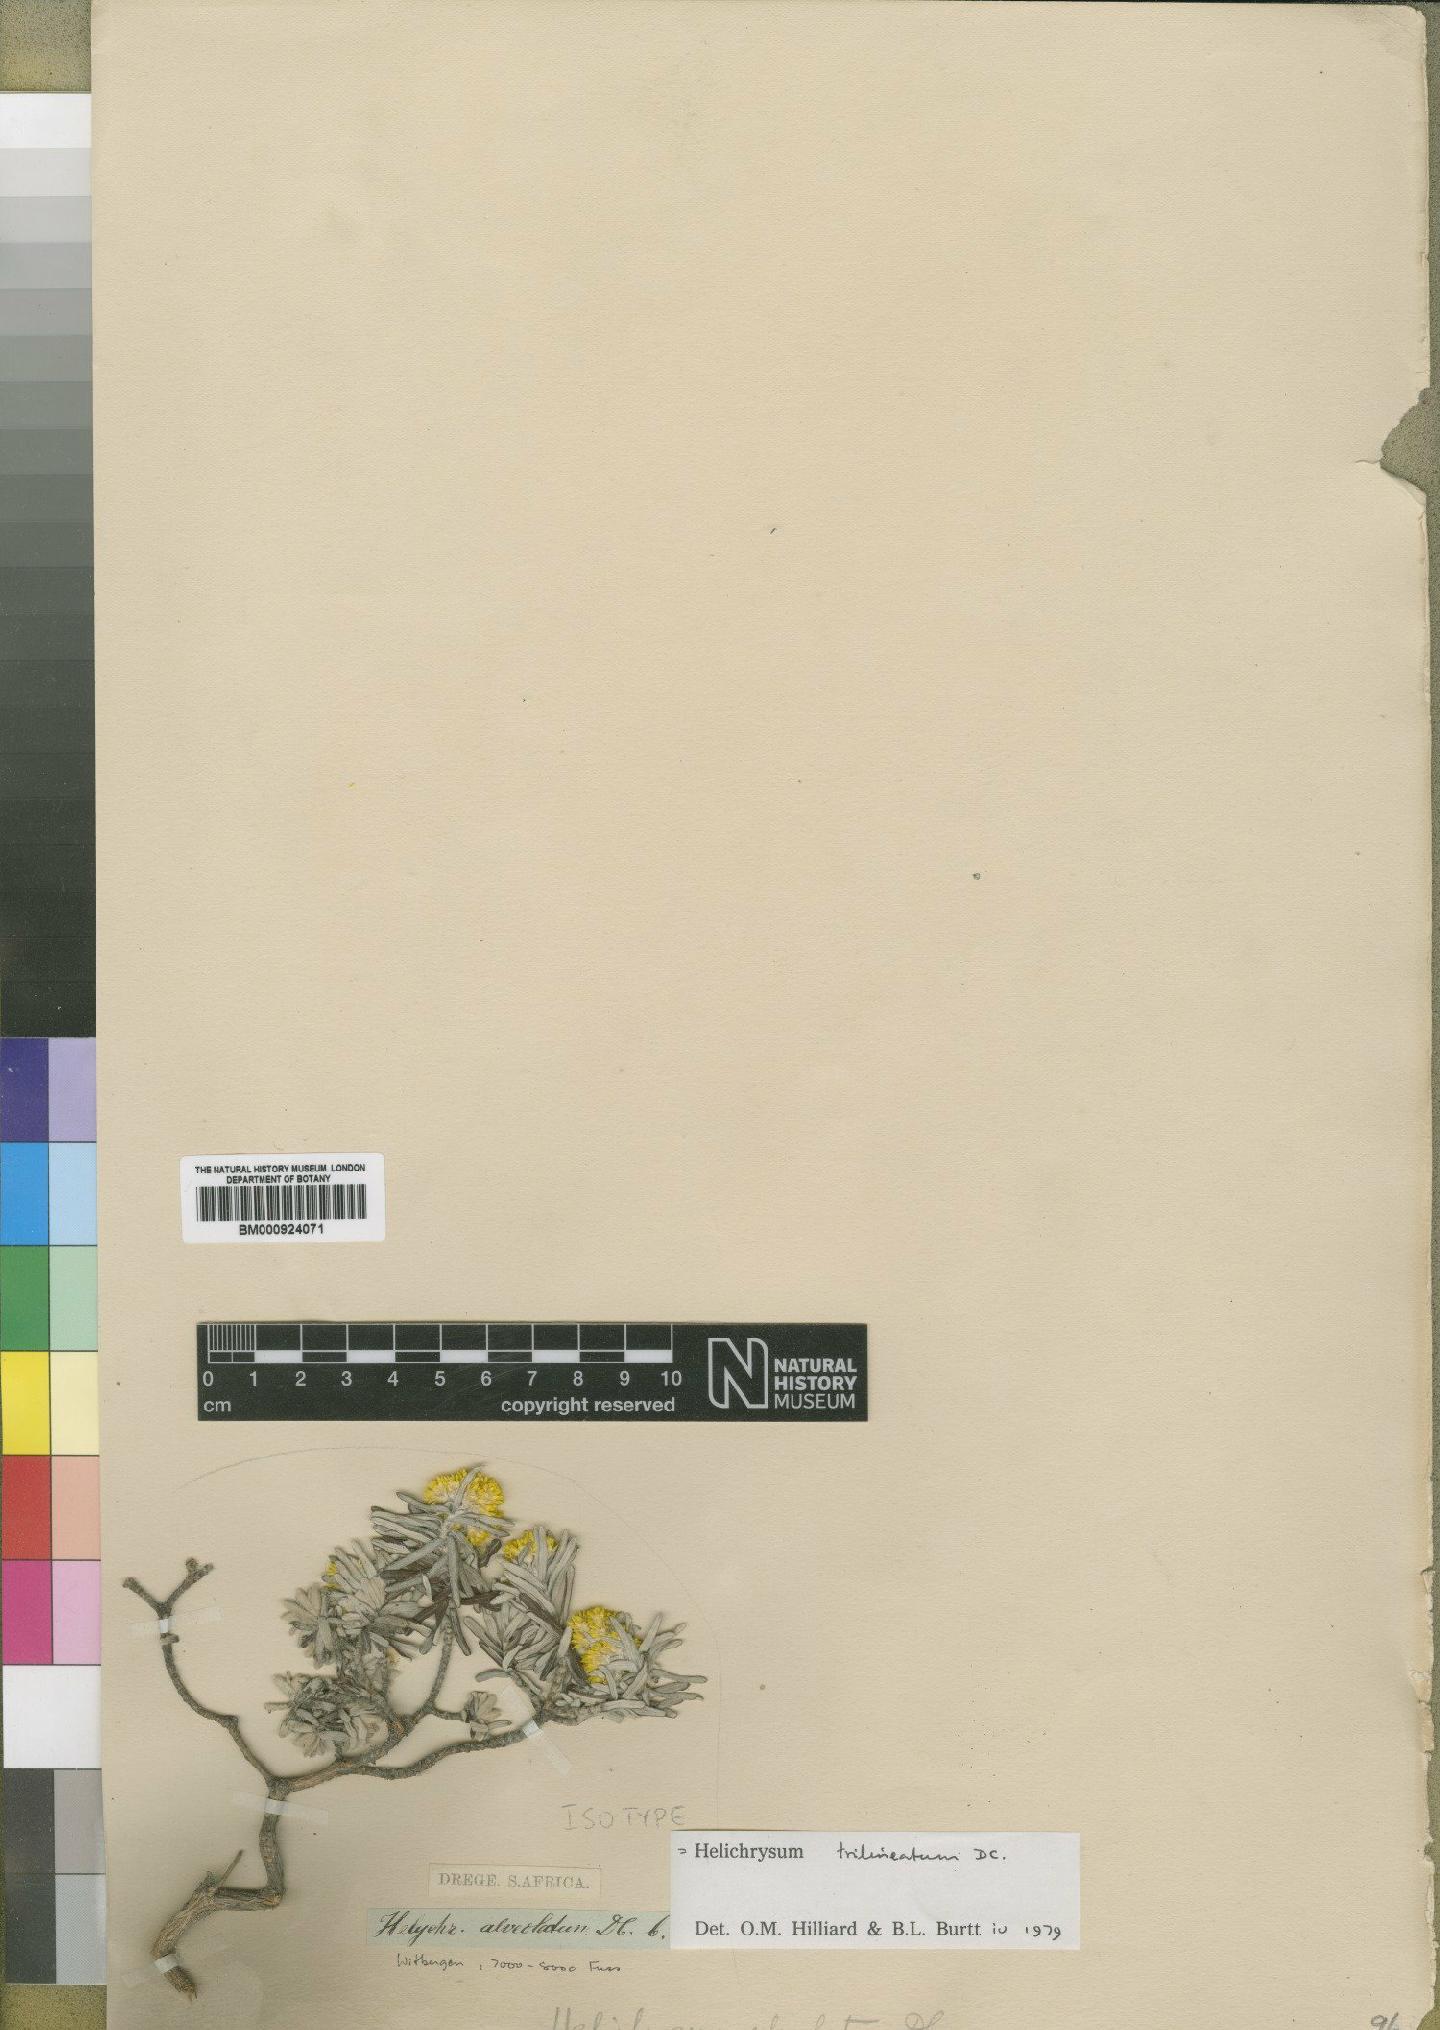 To NHMUK collection (Helichrysum trilineatum DC.; Isotype; NHMUK:ecatalogue:4529099)